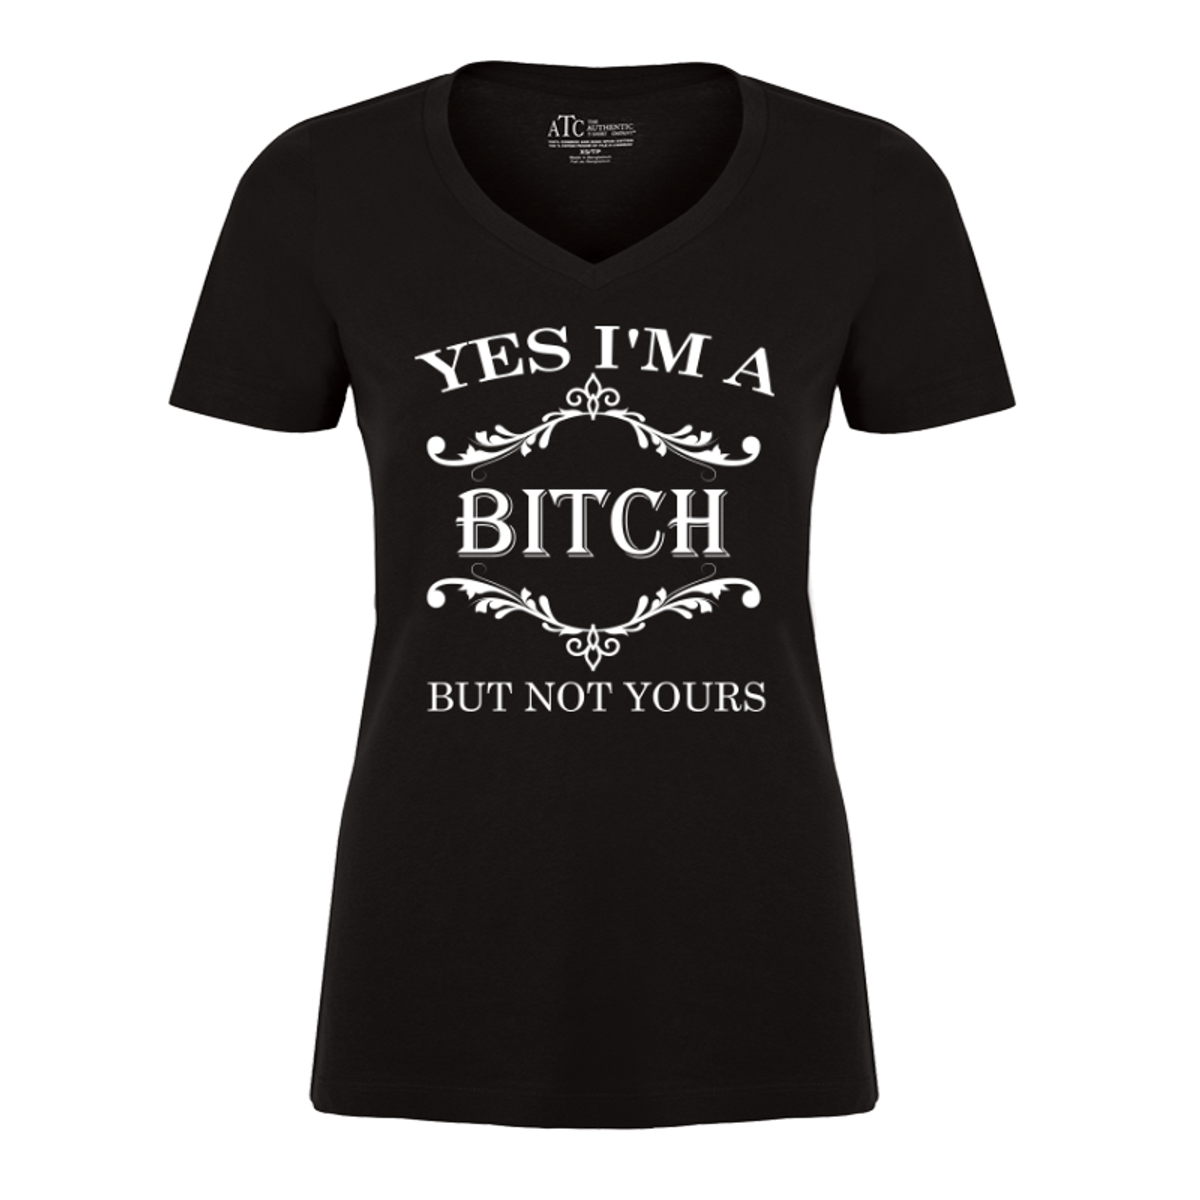 Women's Yes I'M A Bitch But Not Yours - Tshirt - The Inked Boys Shop